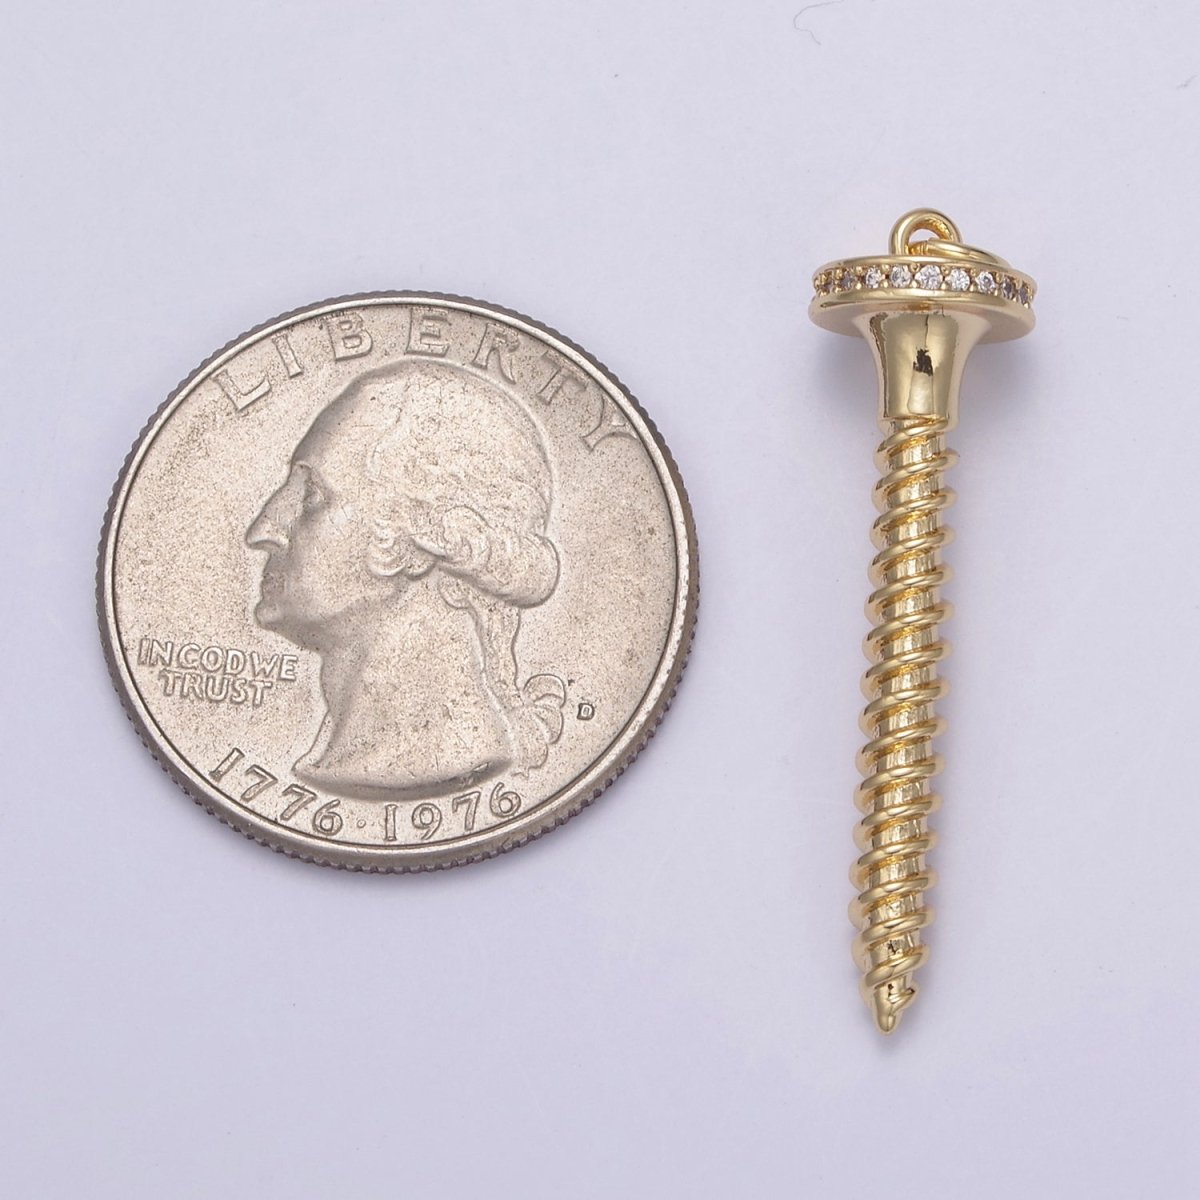 14k Gold Filled Screw Tools Charm Pendant for Necklace Bracelet Jewelry Making Supply N-788 - N-793 - DLUXCA